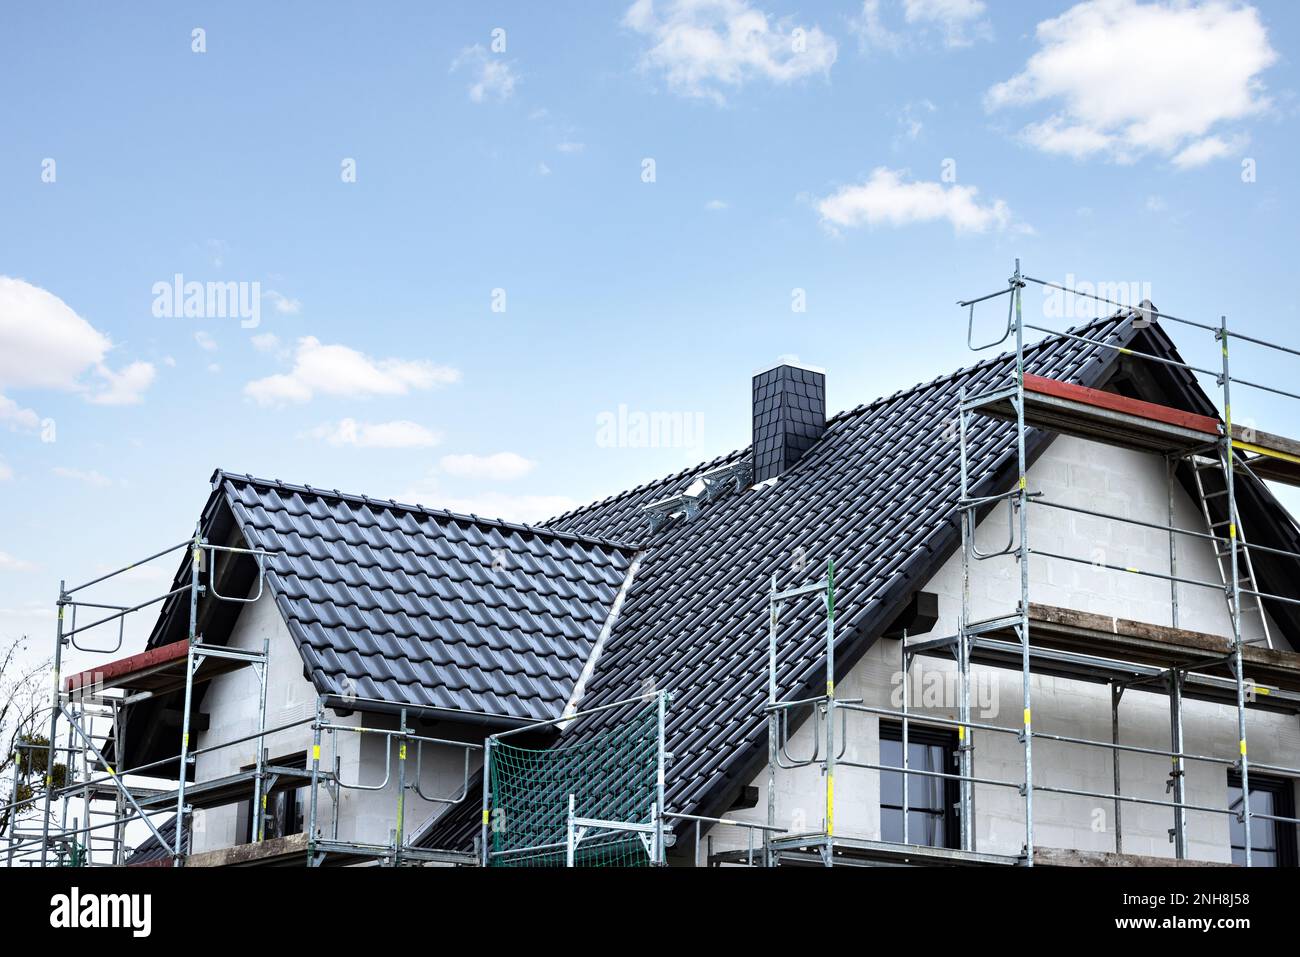 Roof of a single-family house under construction Stock Photo